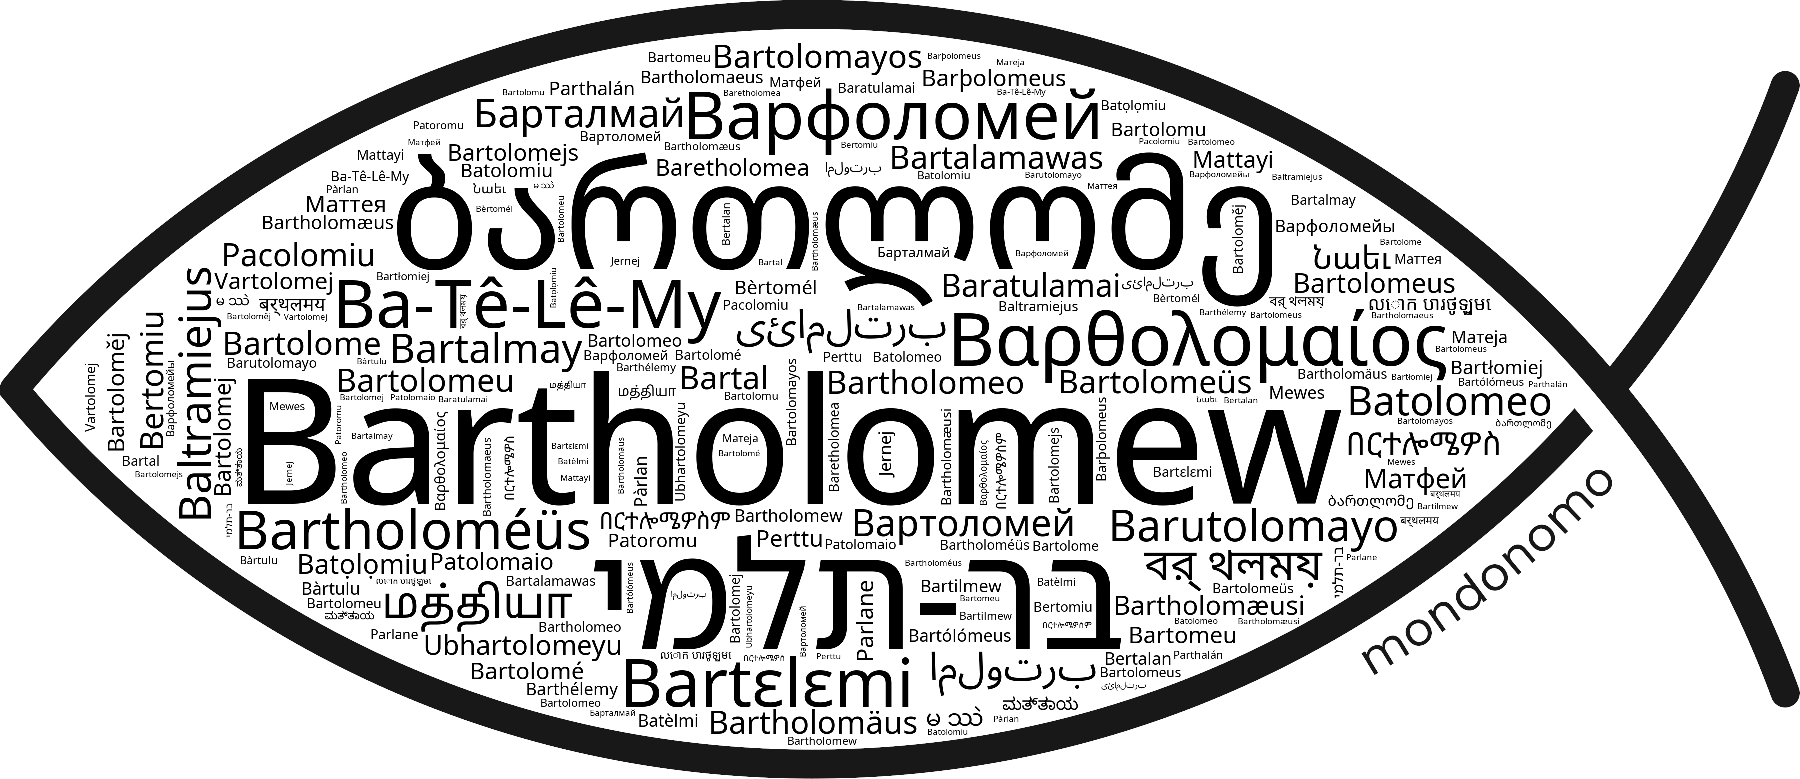 Name Bartholomew in the world's Bibles